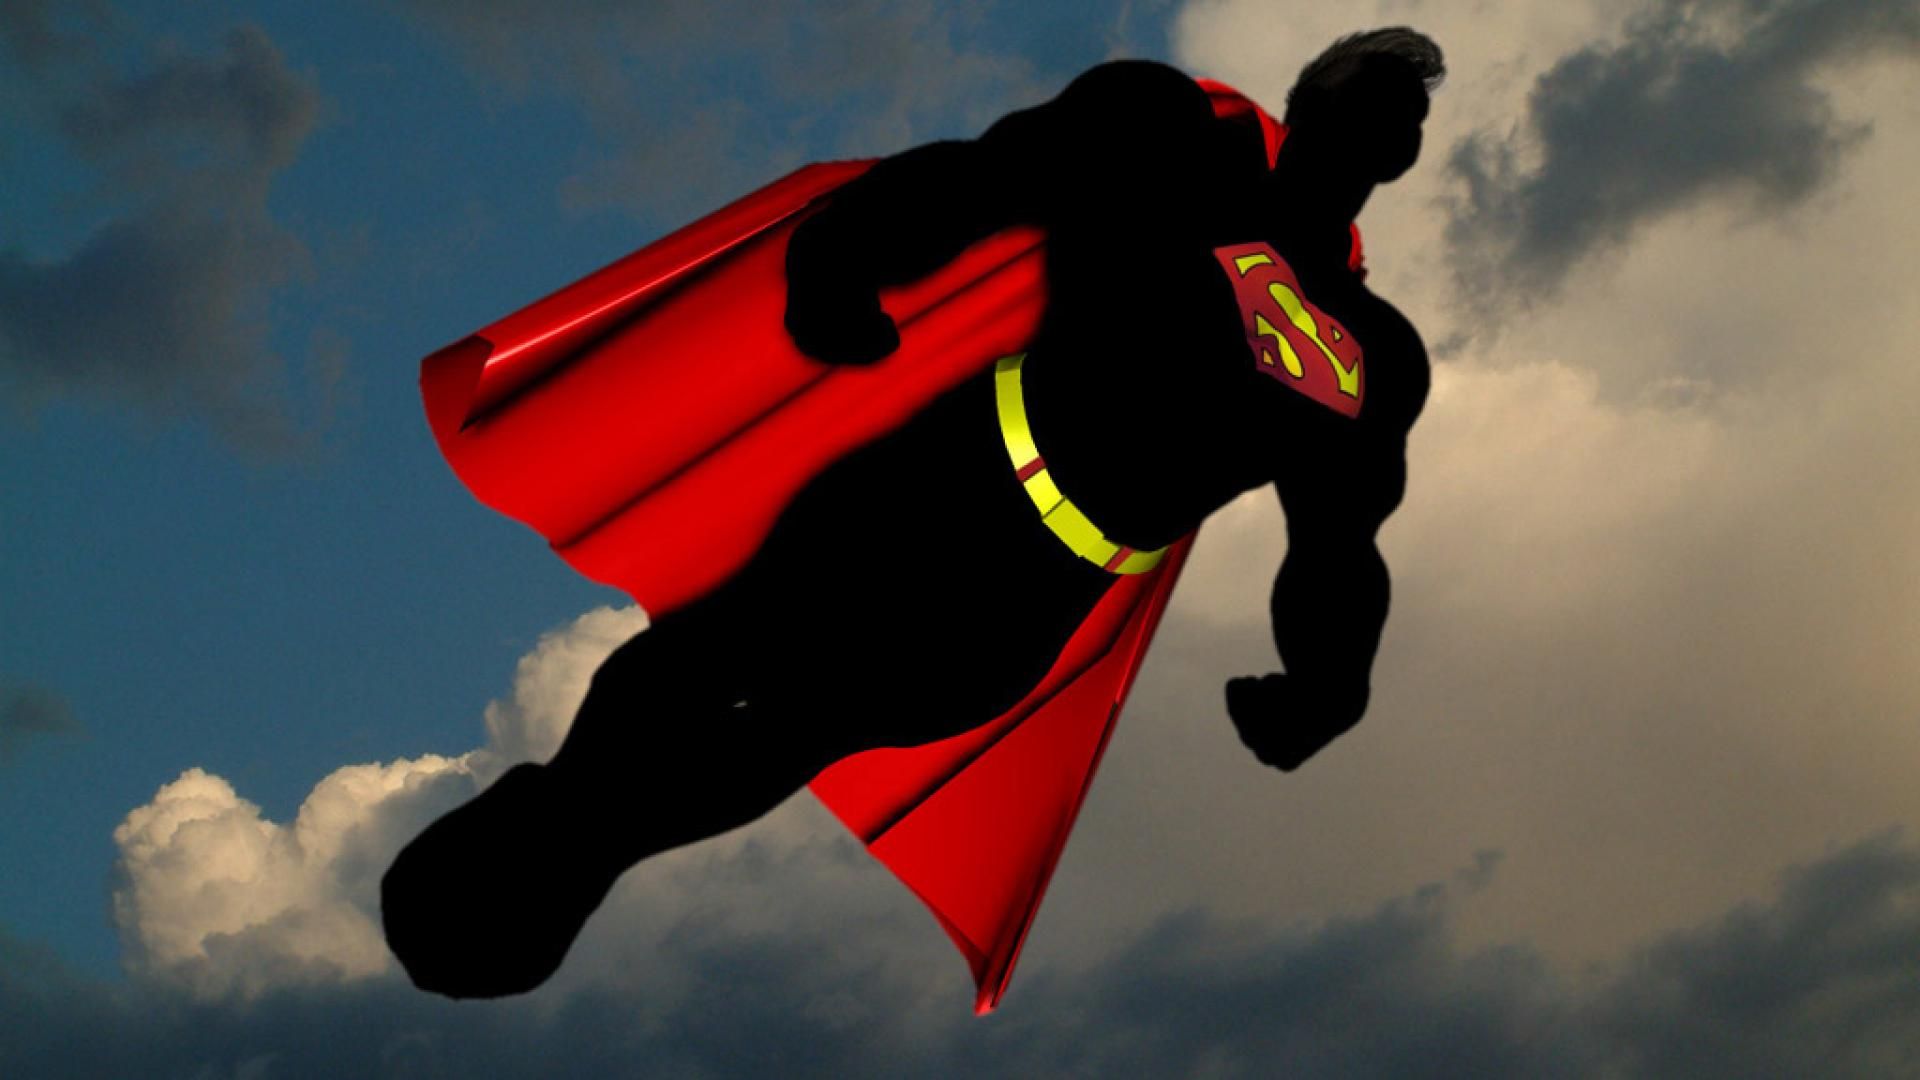 Superman wallpaper - (#178854) - High Quality and Resolution ...